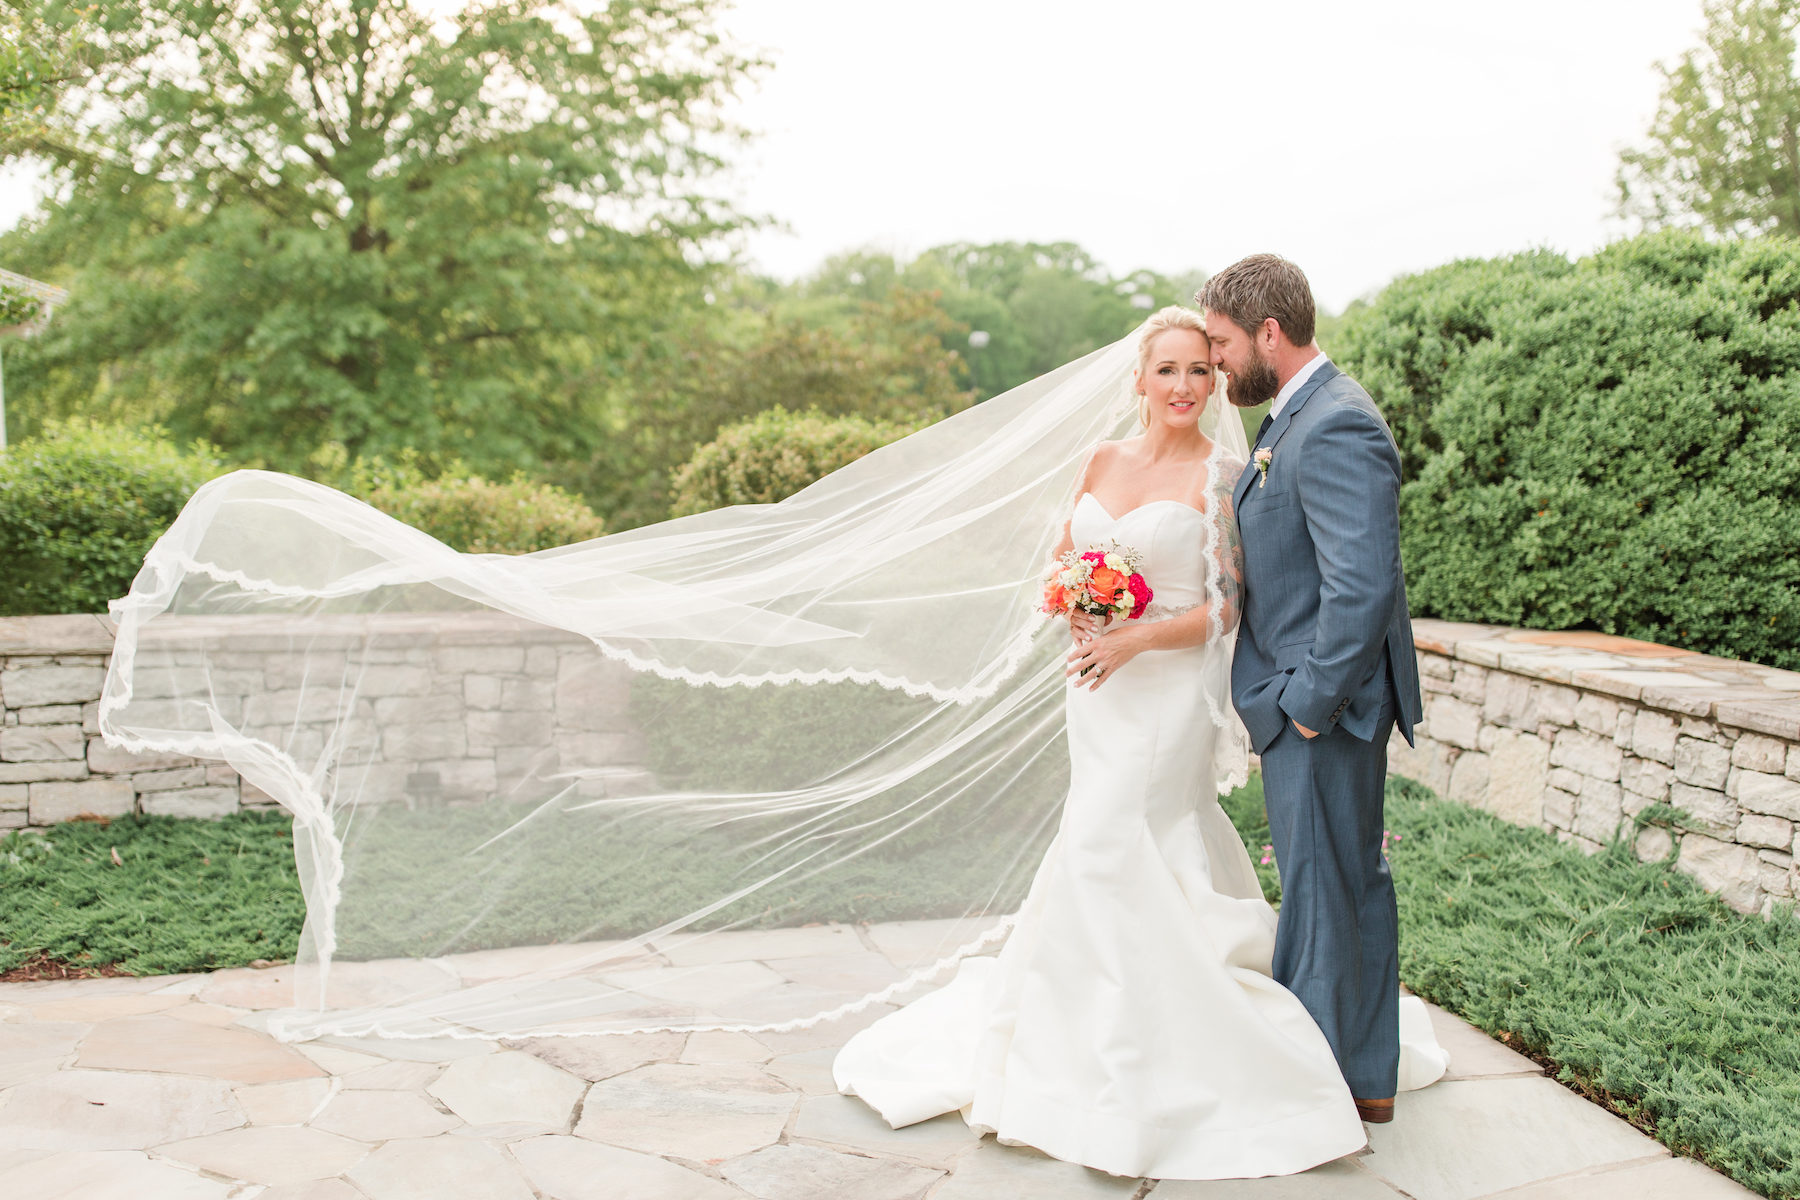 Why You Should Consider a Custom Wedding Dress in Nashville from The615Bride featured on Nashville Bride Guide